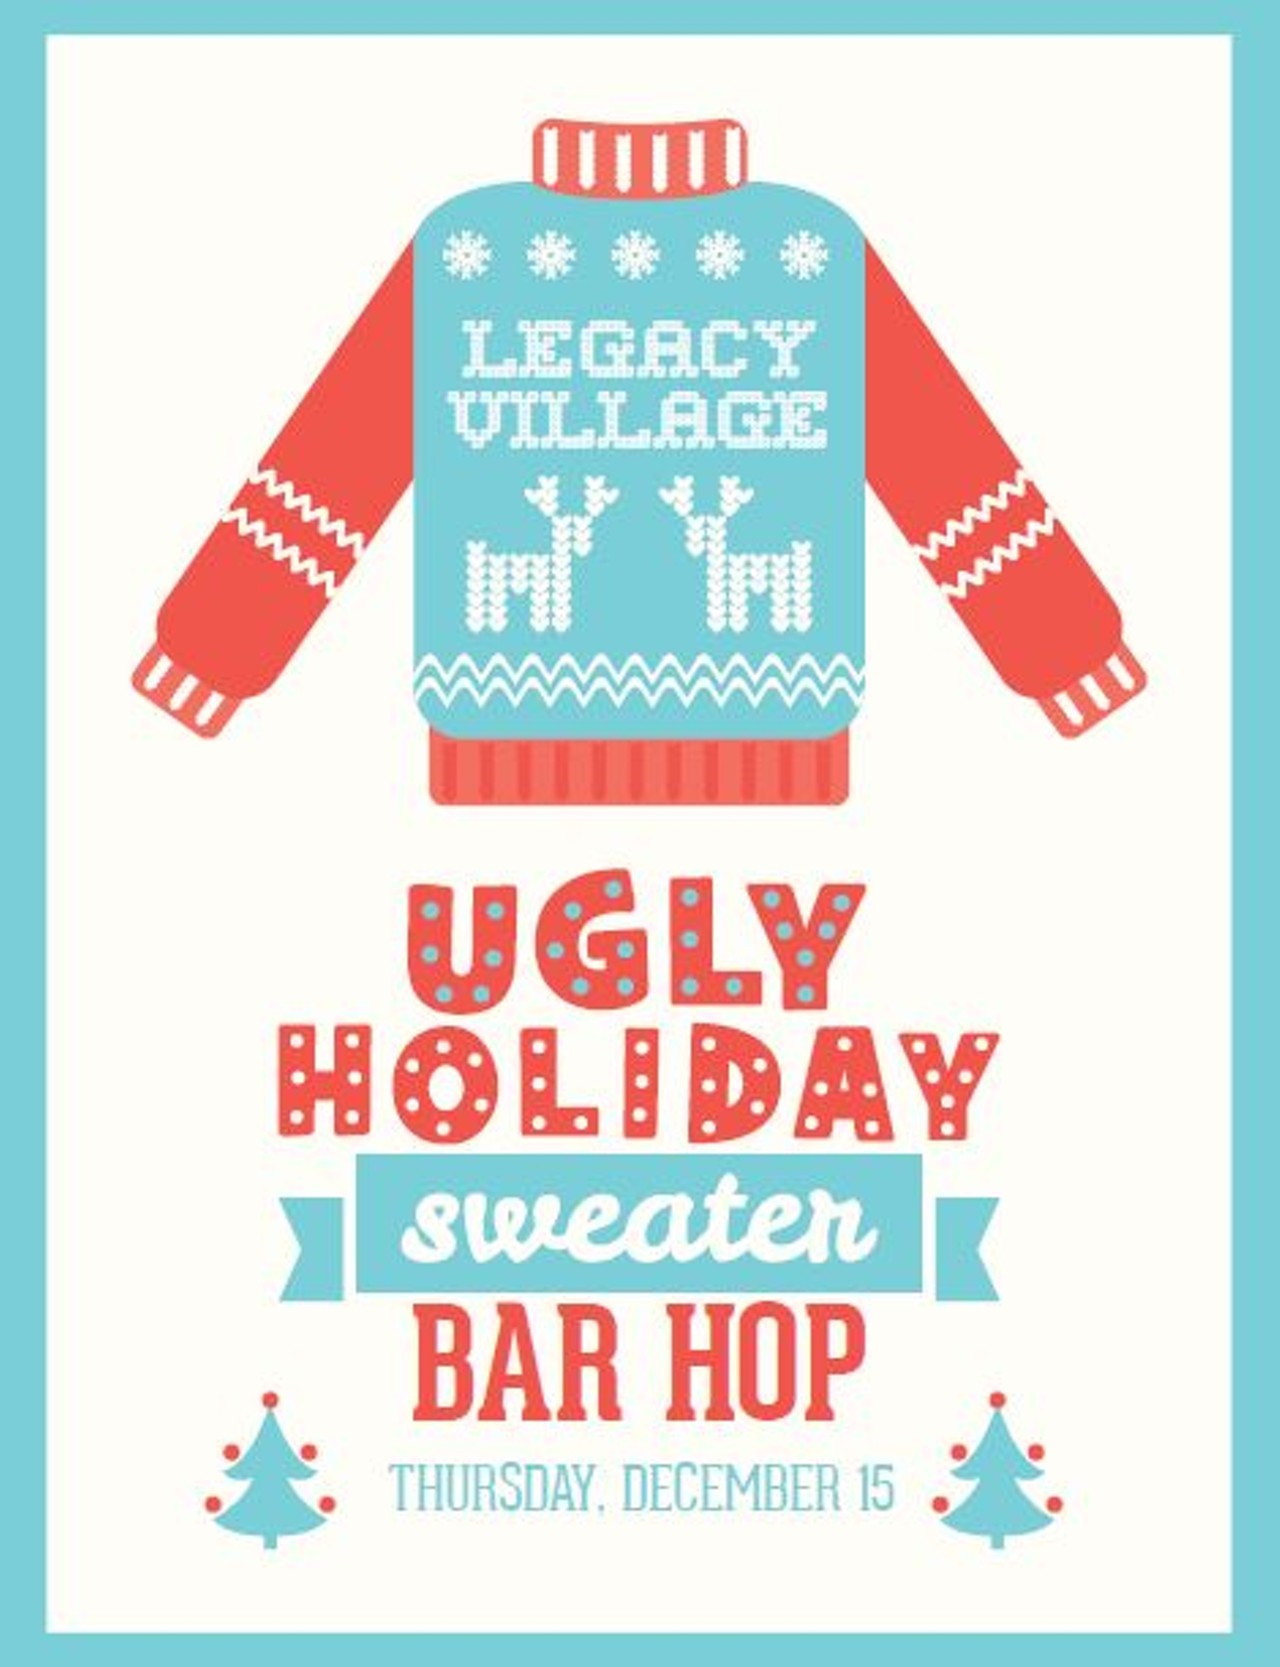 Legacy Village Ugly Sweater Bar Hop - Thu, December 15, 2016
5:00 PM &#150; 10:00 pm at Legacy Village (25001 Cedar Road). Tickets are $10 per person and can be bought here eventbrite.com/e/legacy-village-ugly-sweater-bar-hop-tickets-29254508021